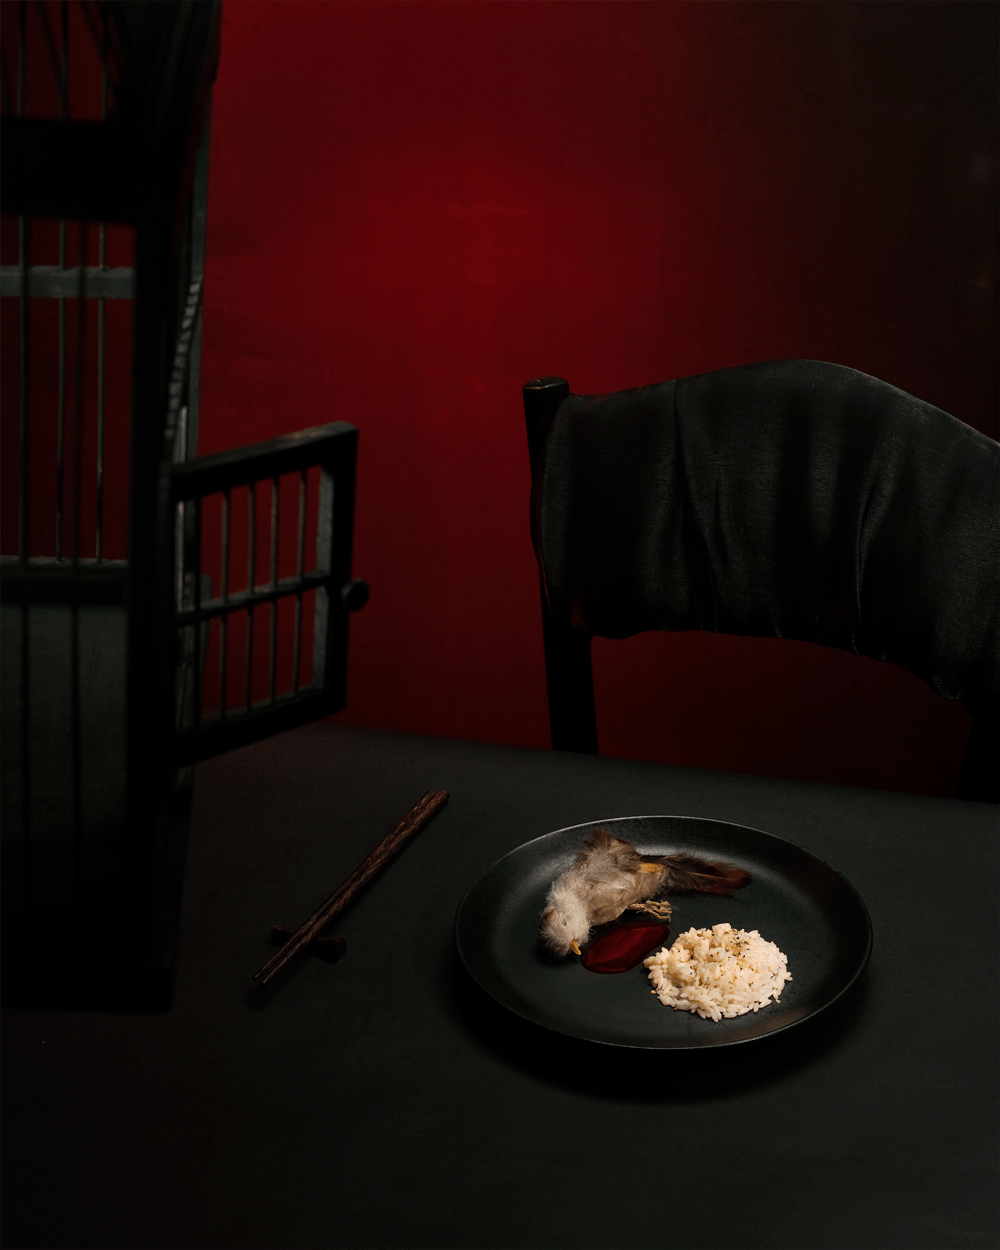 © Jacqueline Louter - Pet or Dinner